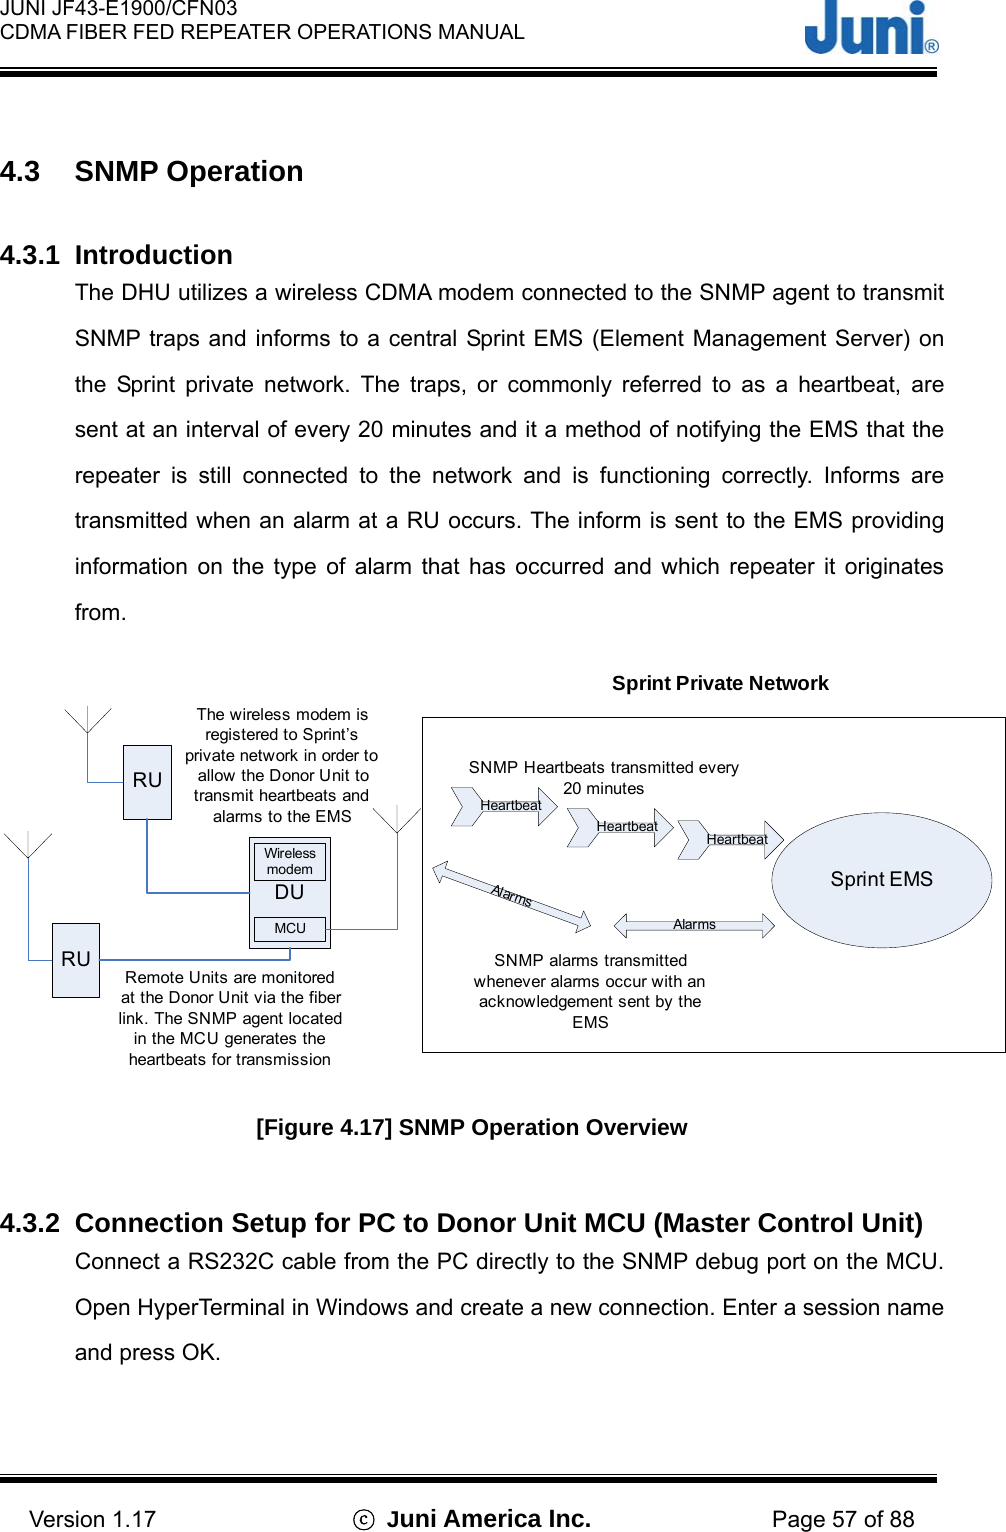  JUNI JF43-E1900/CFN03 CDMA FIBER FED REPEATER OPERATIONS MANUAL                                    Version 1.17  ⓒ Juni America Inc. Page 57 of 88  4.3 SNMP Operation  4.3.1 Introduction The DHU utilizes a wireless CDMA modem connected to the SNMP agent to transmit SNMP traps and informs to a central Sprint EMS (Element Management Server) on the Sprint private network. The traps, or commonly referred to as a heartbeat, are sent at an interval of every 20 minutes and it a method of notifying the EMS that the repeater is still connected to the network and is functioning correctly. Informs are transmitted when an alarm at a RU occurs. The inform is sent to the EMS providing information on the type of alarm that has occurred and which repeater it originates from. DURURUMCUHeartbeatSNMP Heartbeats transmitted every 20 minutesWireless modemRemote Units are monitored at the Donor Unit via the fiber link. The SNMP agent located in the MCU generates the heartbeats for transmissionThe wireless modem is registered to Sprint’s private network in order to allow the Donor Unit to transmit heartbeats and alarms to the EMSSNMP alarms transmitted whenever alarms occur with an acknowledgement sent by the EMSAlarmsAlarmsSprint Private NetworkSprint EMSHeartbeat Heartbeat[Figure 4.17] SNMP Operation Overview  4.3.2  Connection Setup for PC to Donor Unit MCU (Master Control Unit) Connect a RS232C cable from the PC directly to the SNMP debug port on the MCU. Open HyperTerminal in Windows and create a new connection. Enter a session name and press OK.   